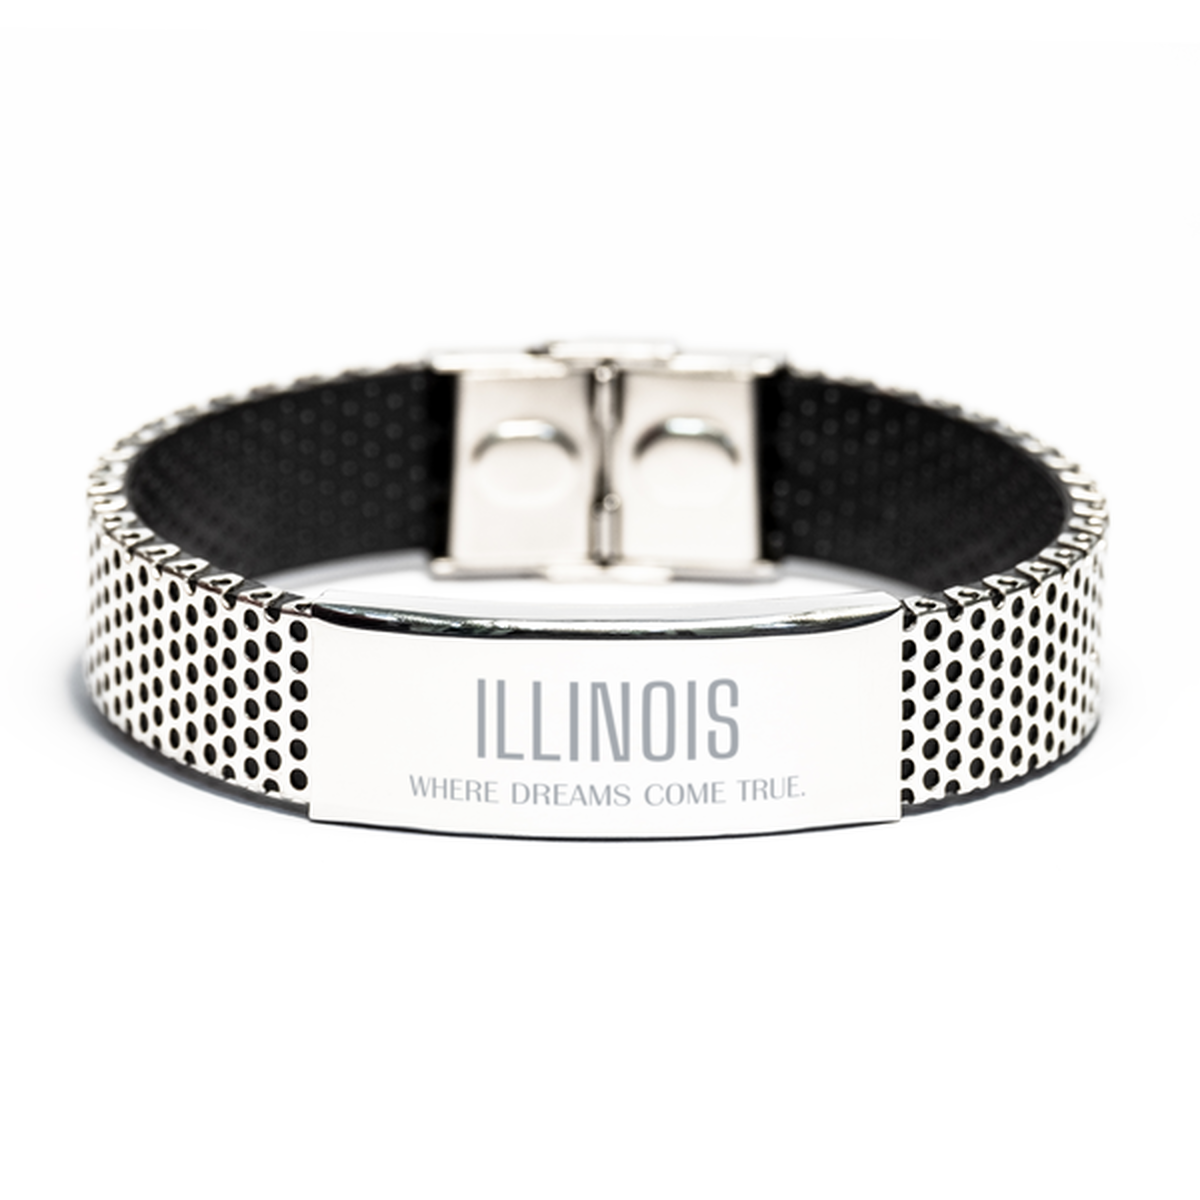 Love Illinois State Stainless Steel Bracelet, Illinois Where dreams come true, Birthday Inspirational Gifts For Illinois Men, Women, Friends